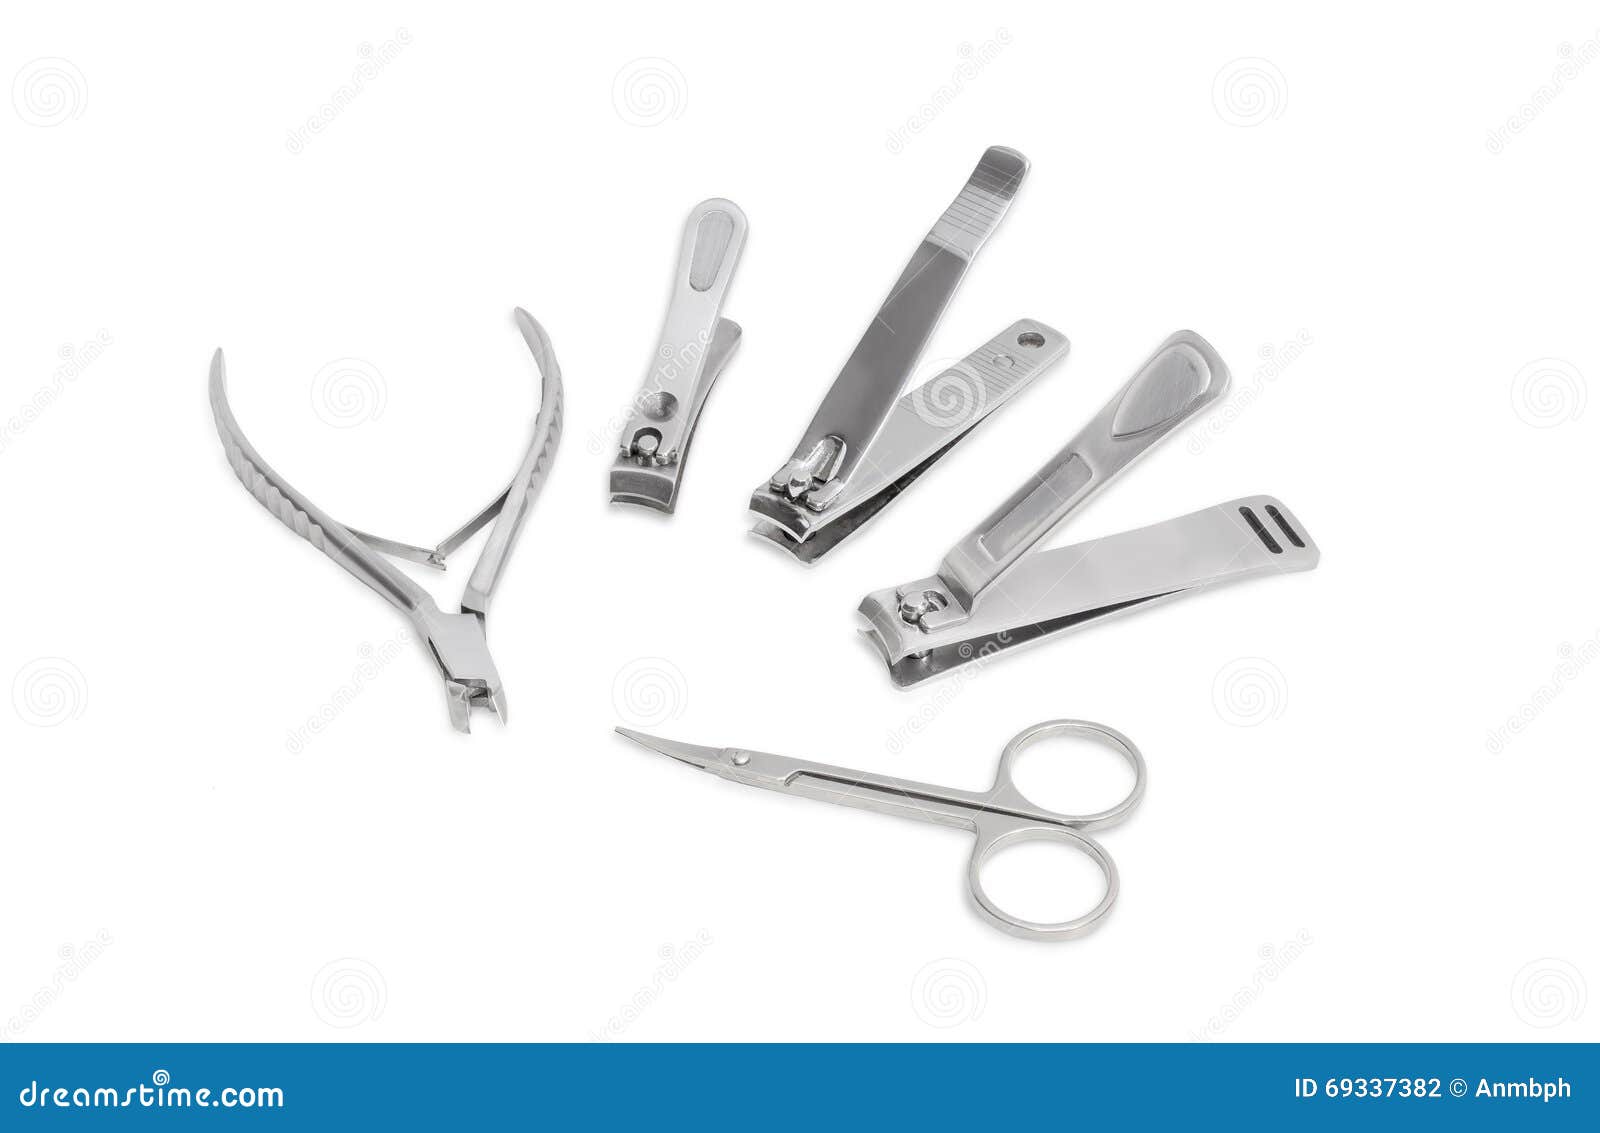 Several Nail Clippers Different Types and Sizes and Nail Scissor Stock ...